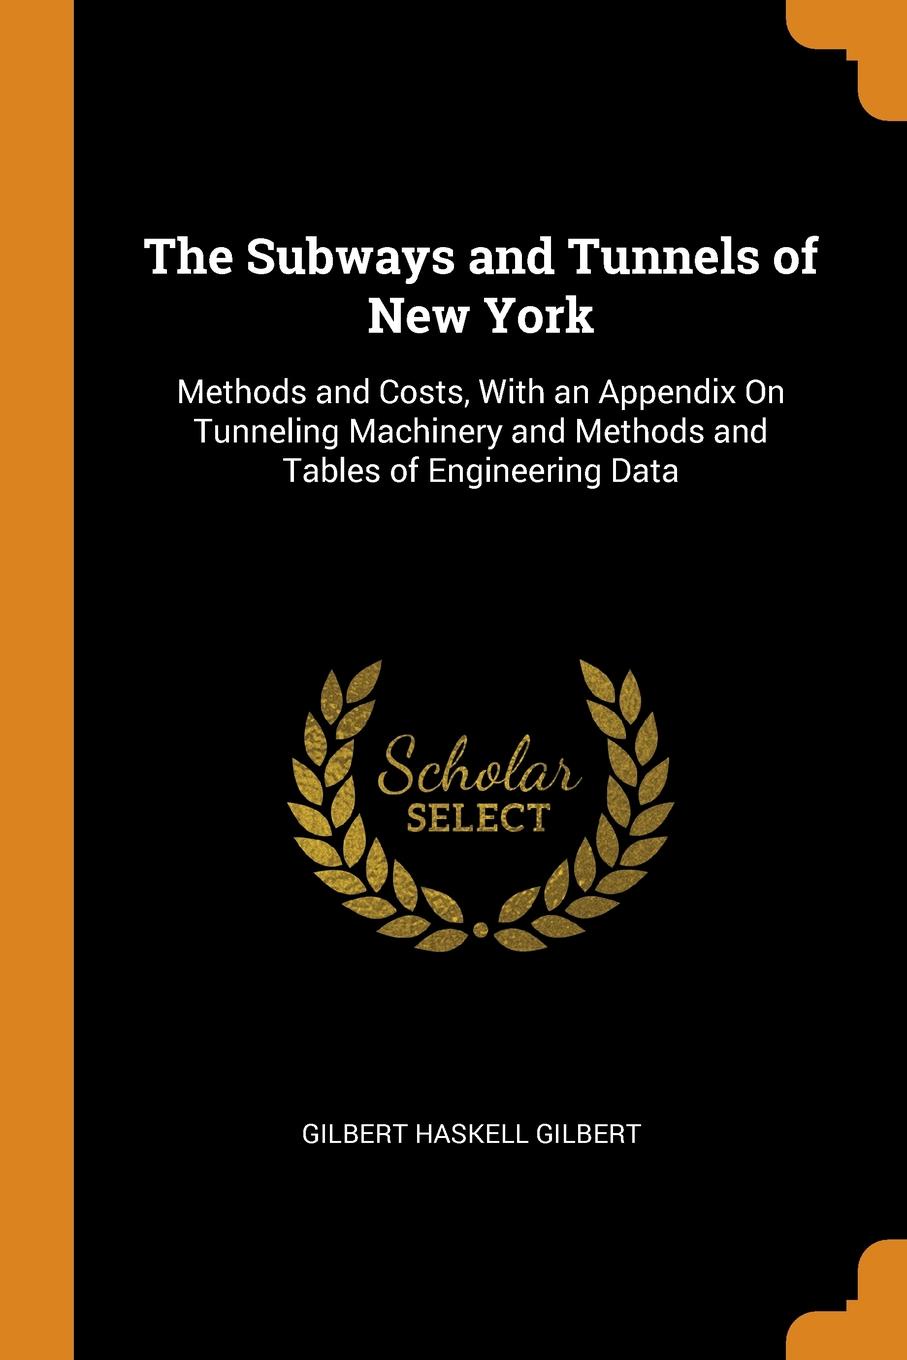 The Subways and Tunnels of New York. Methods and Costs, With an Appendix On Tunneling Machinery and Methods and Tables of Engineering Data